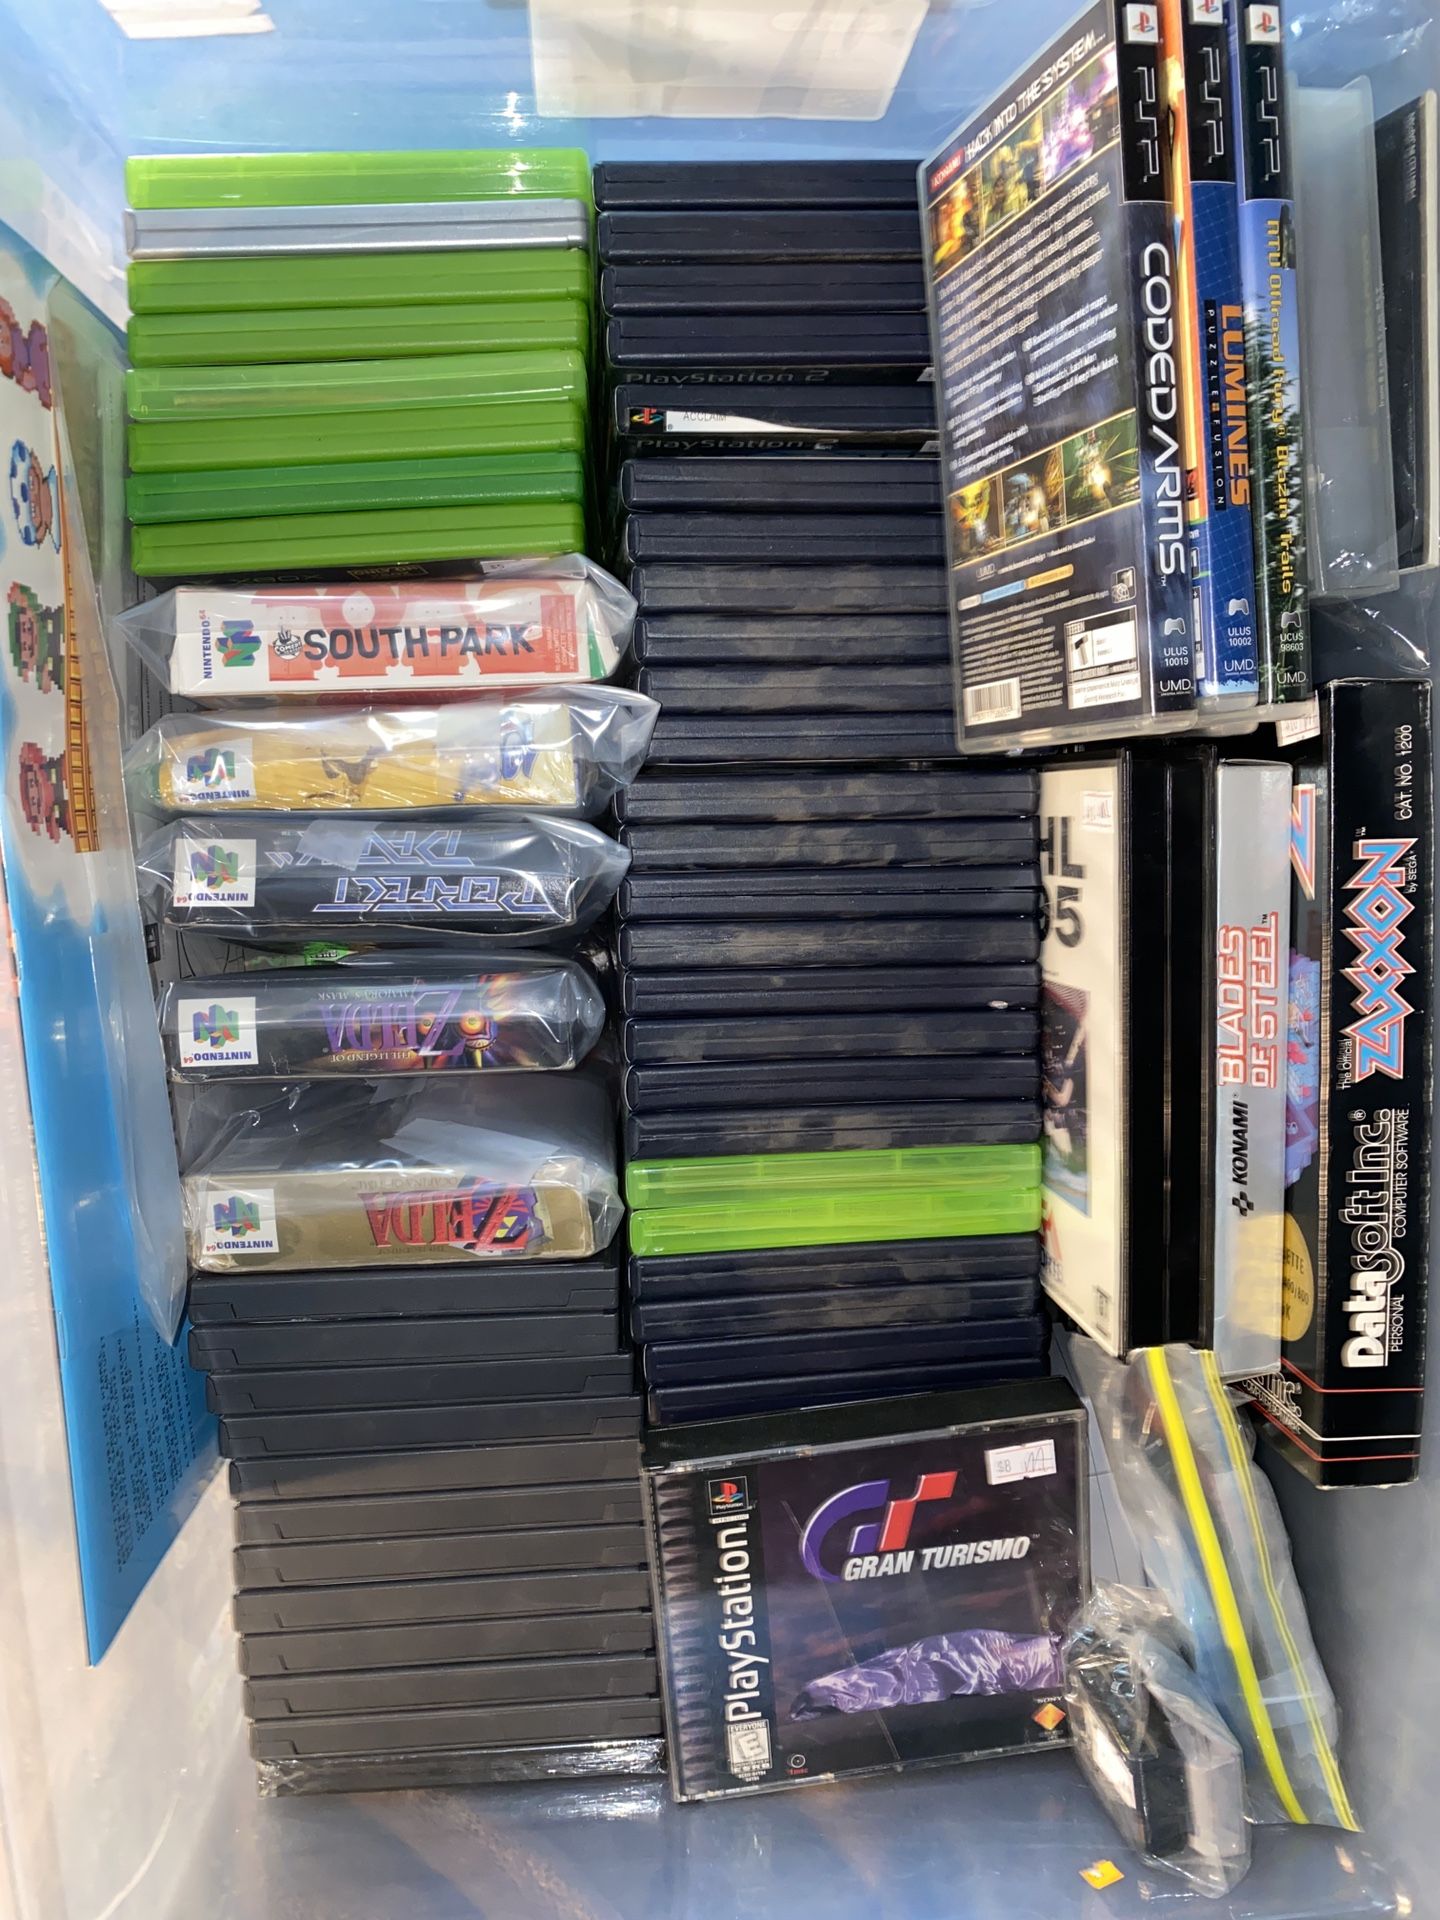 Video Game Sale Saturday At Mantiques In Fremont Niles Ca.  11-6  Nintendo Gamecube Playstation Xbox games   All priced individually and to sell. More